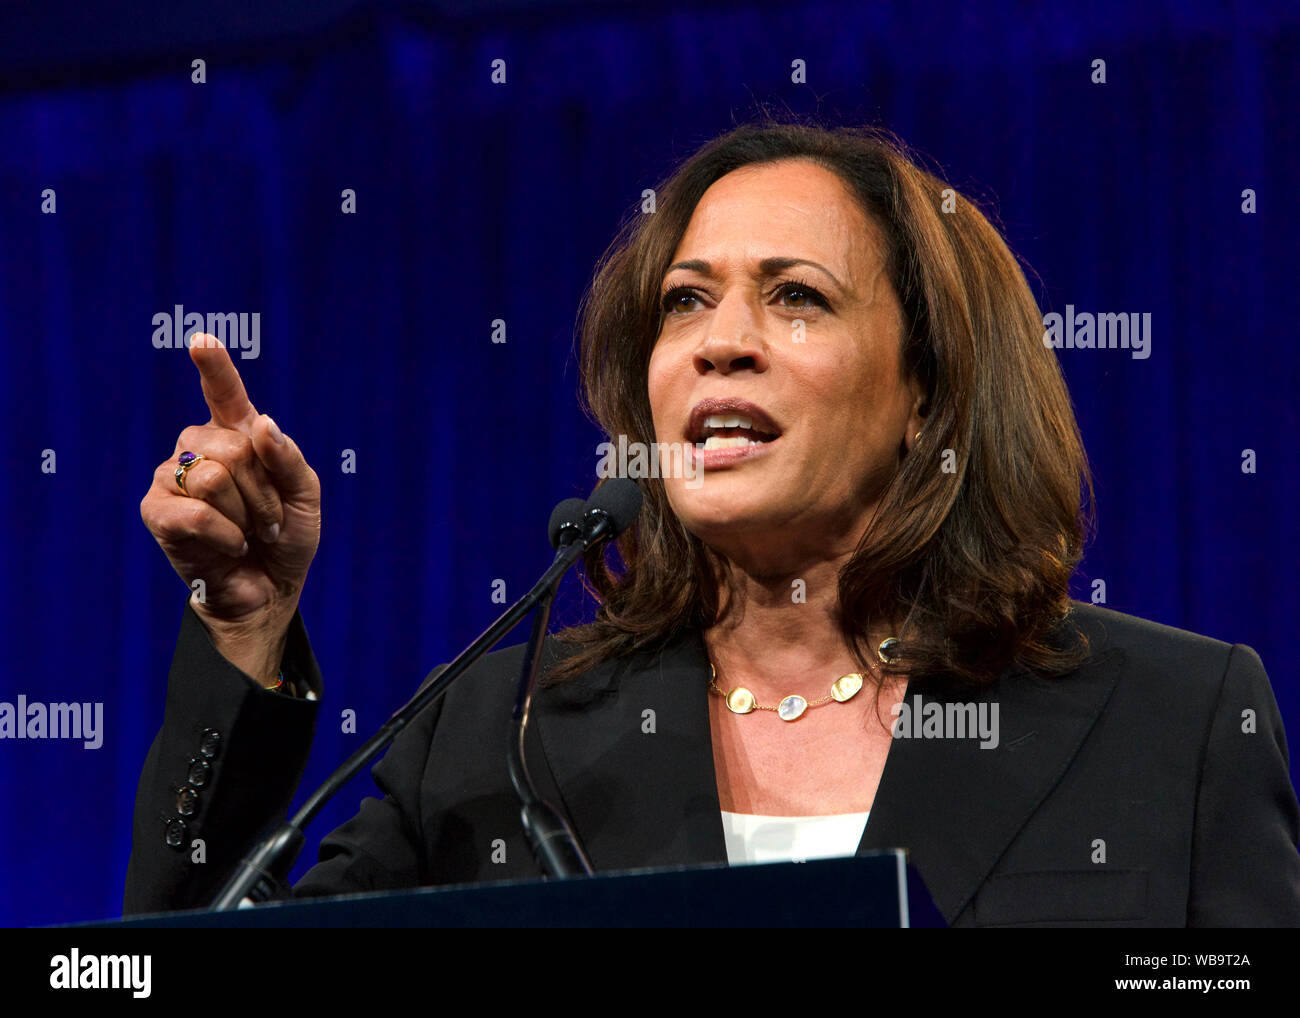 San Francisco, CA - August 23, 2019: Presidential candidate Kamala Harris speaking at the Democratic National Convention summer session in San Francis Stock Photo